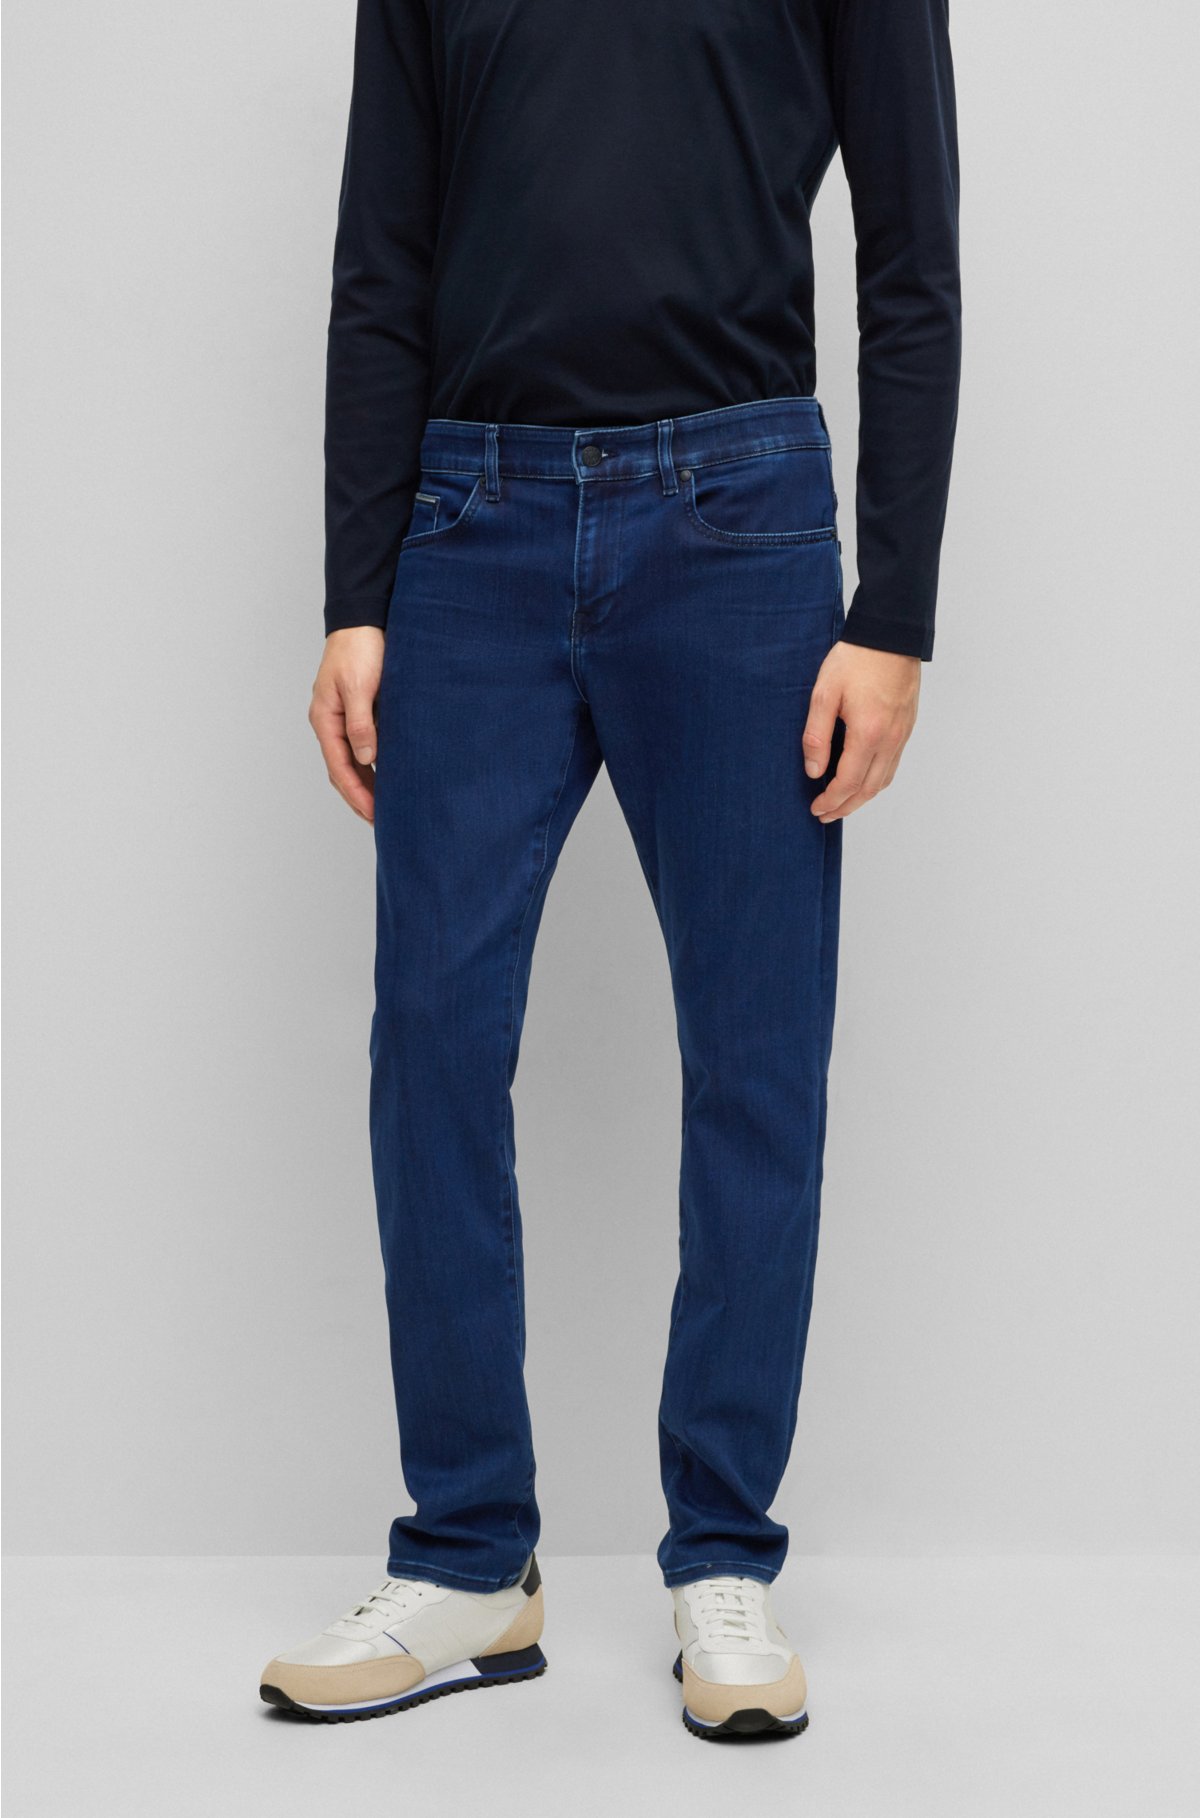 Slim-fit denim - jeans blue satin-touch in BOSS